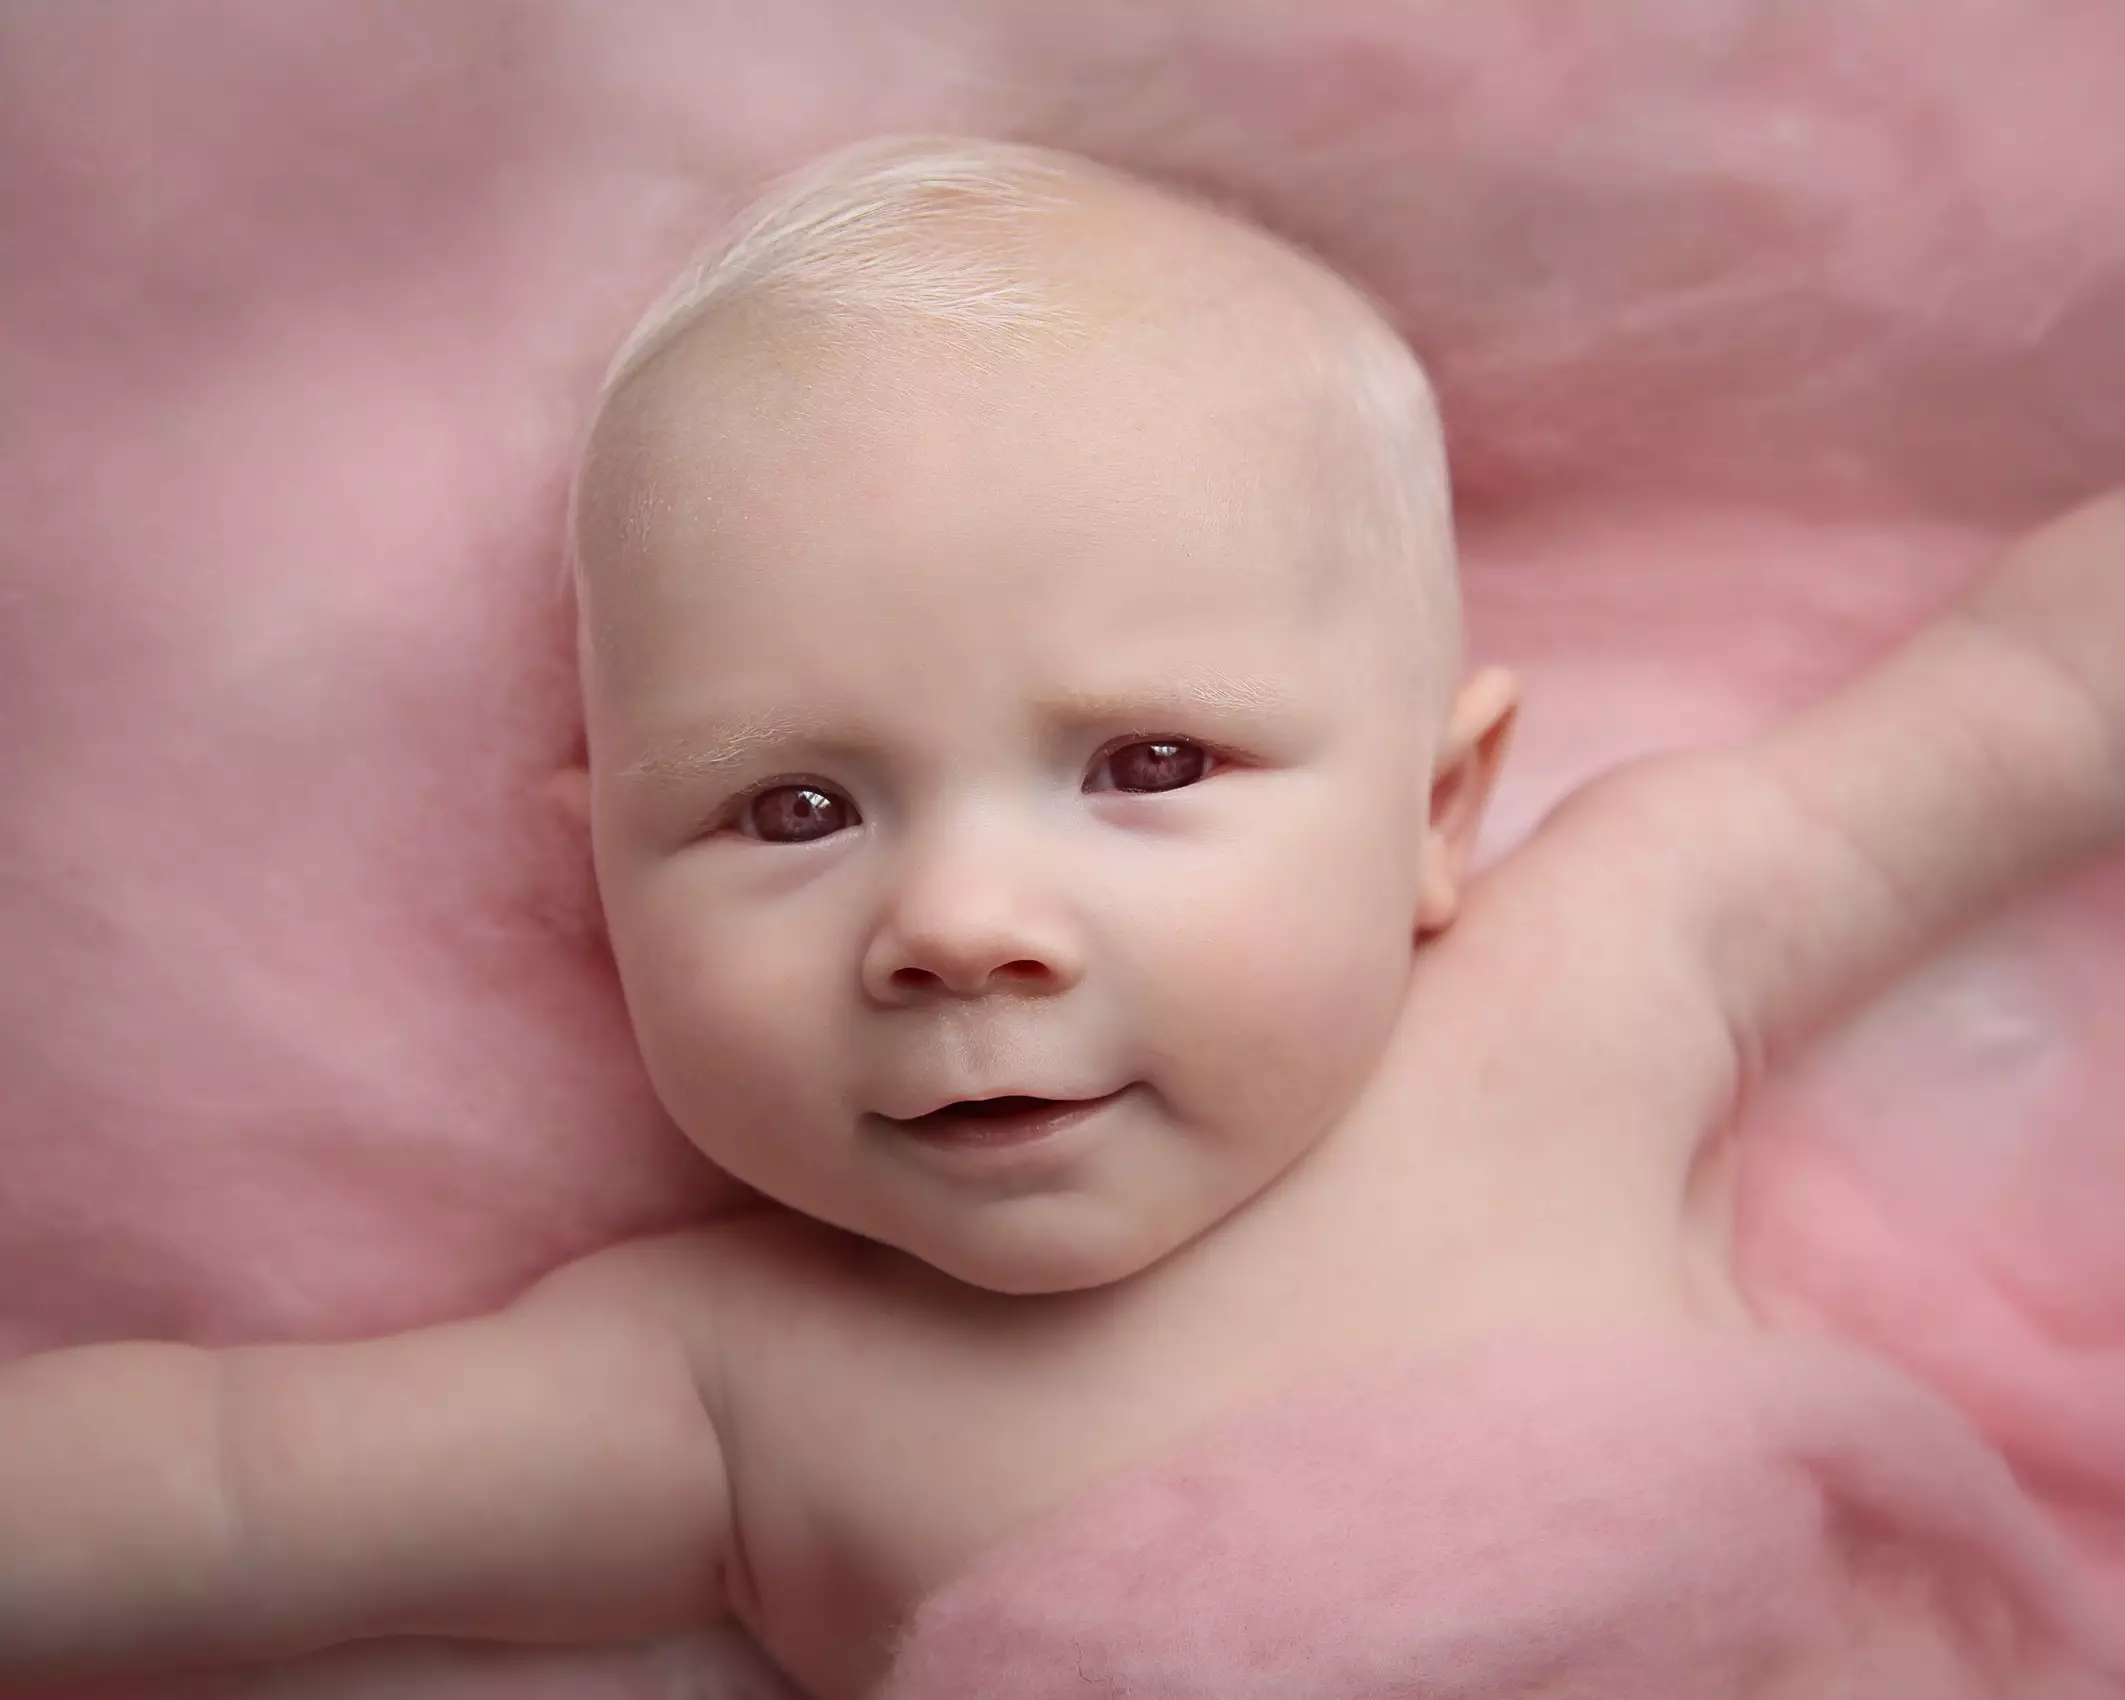 Baby Ava was born with Albinism.